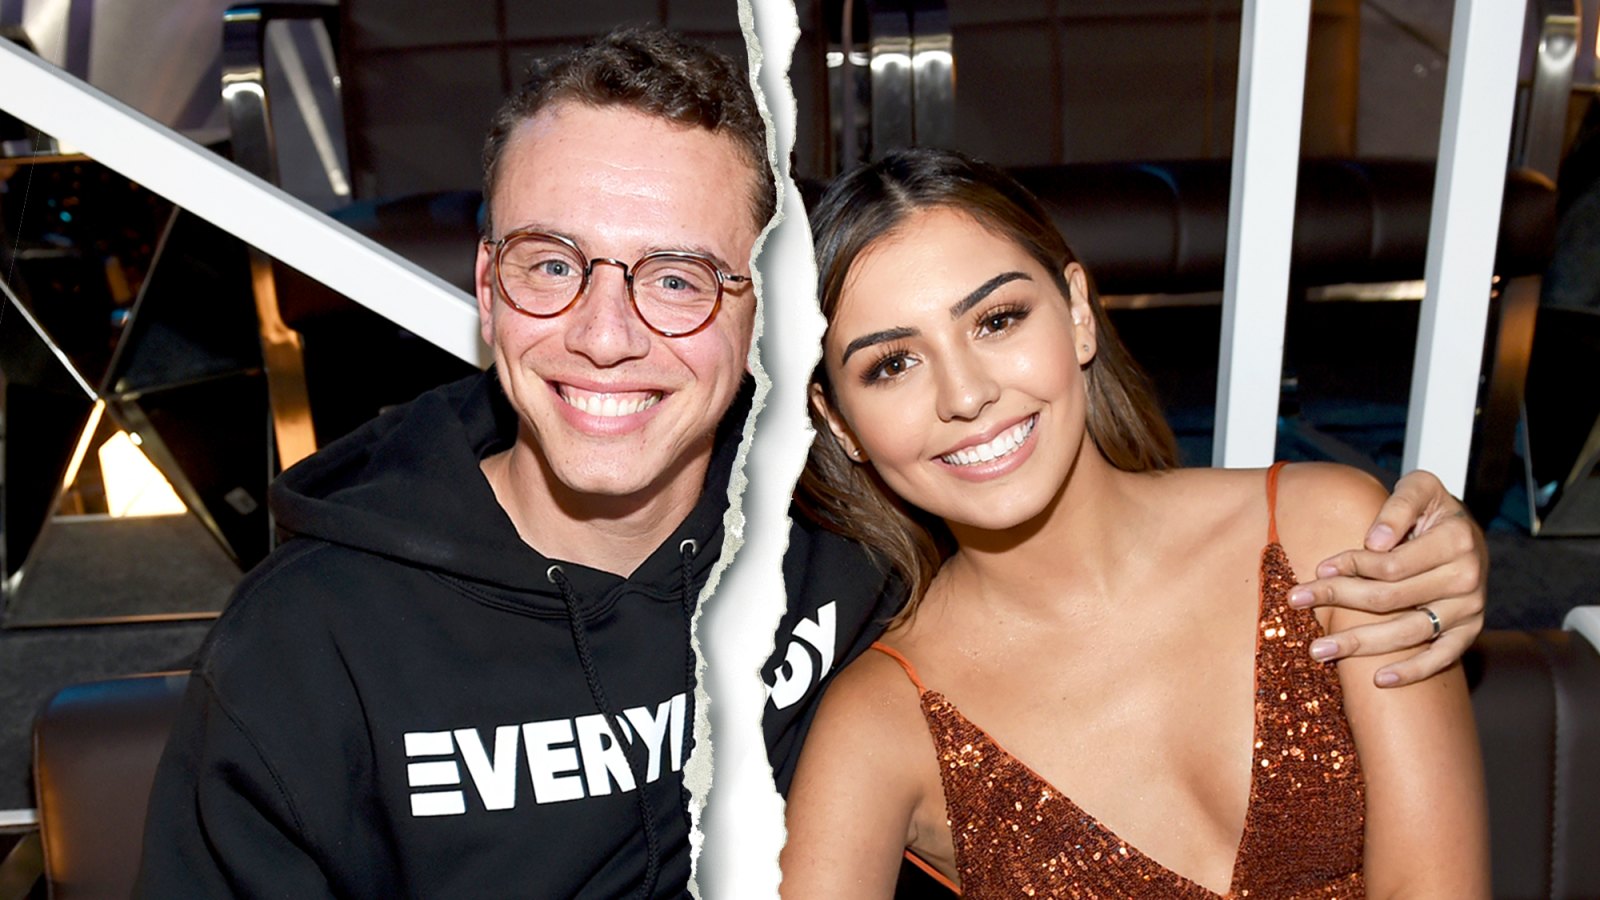 Logic and Jessica Andrea attend the 2017 MTV Video Music Awards at The Forum in Inglewood, California.